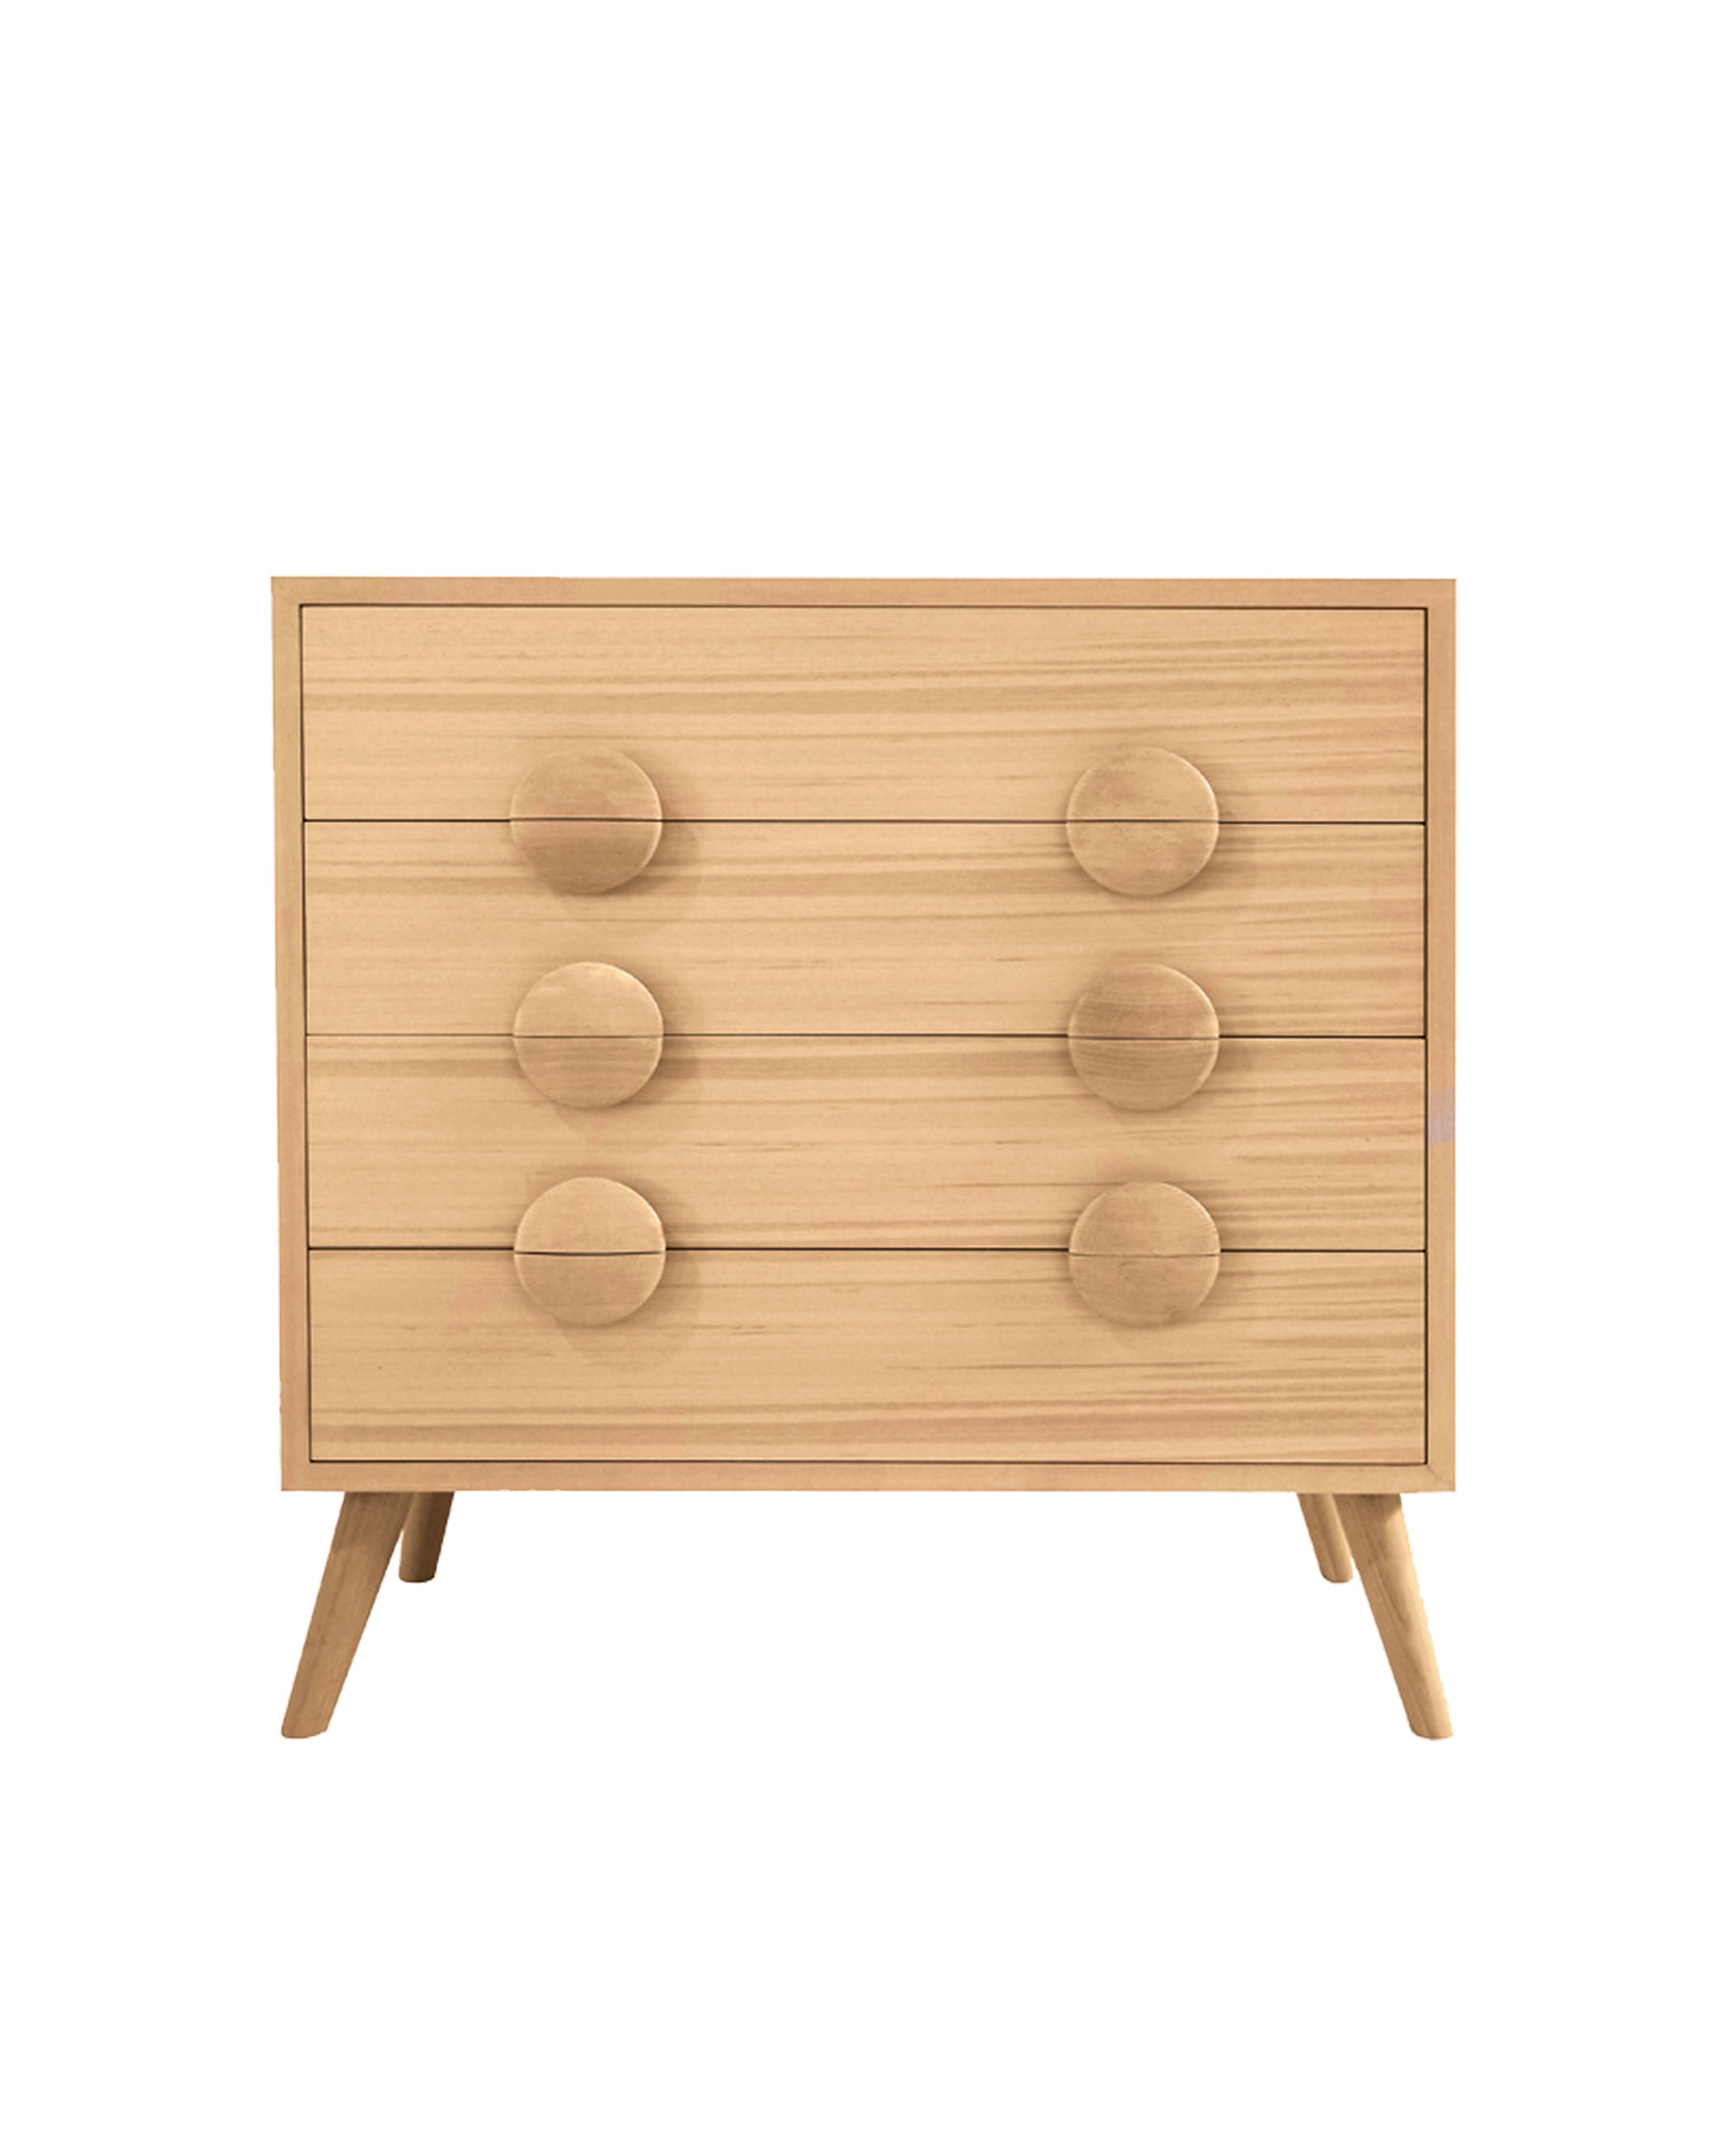 Charlie Chest of Drawers features signature hand turned button handles and angled legs. The frame conceals intricate mitred joinery which wrap around four spacious drawers. Designed to perfectly co-ordinate with the Charlie furniture collection.